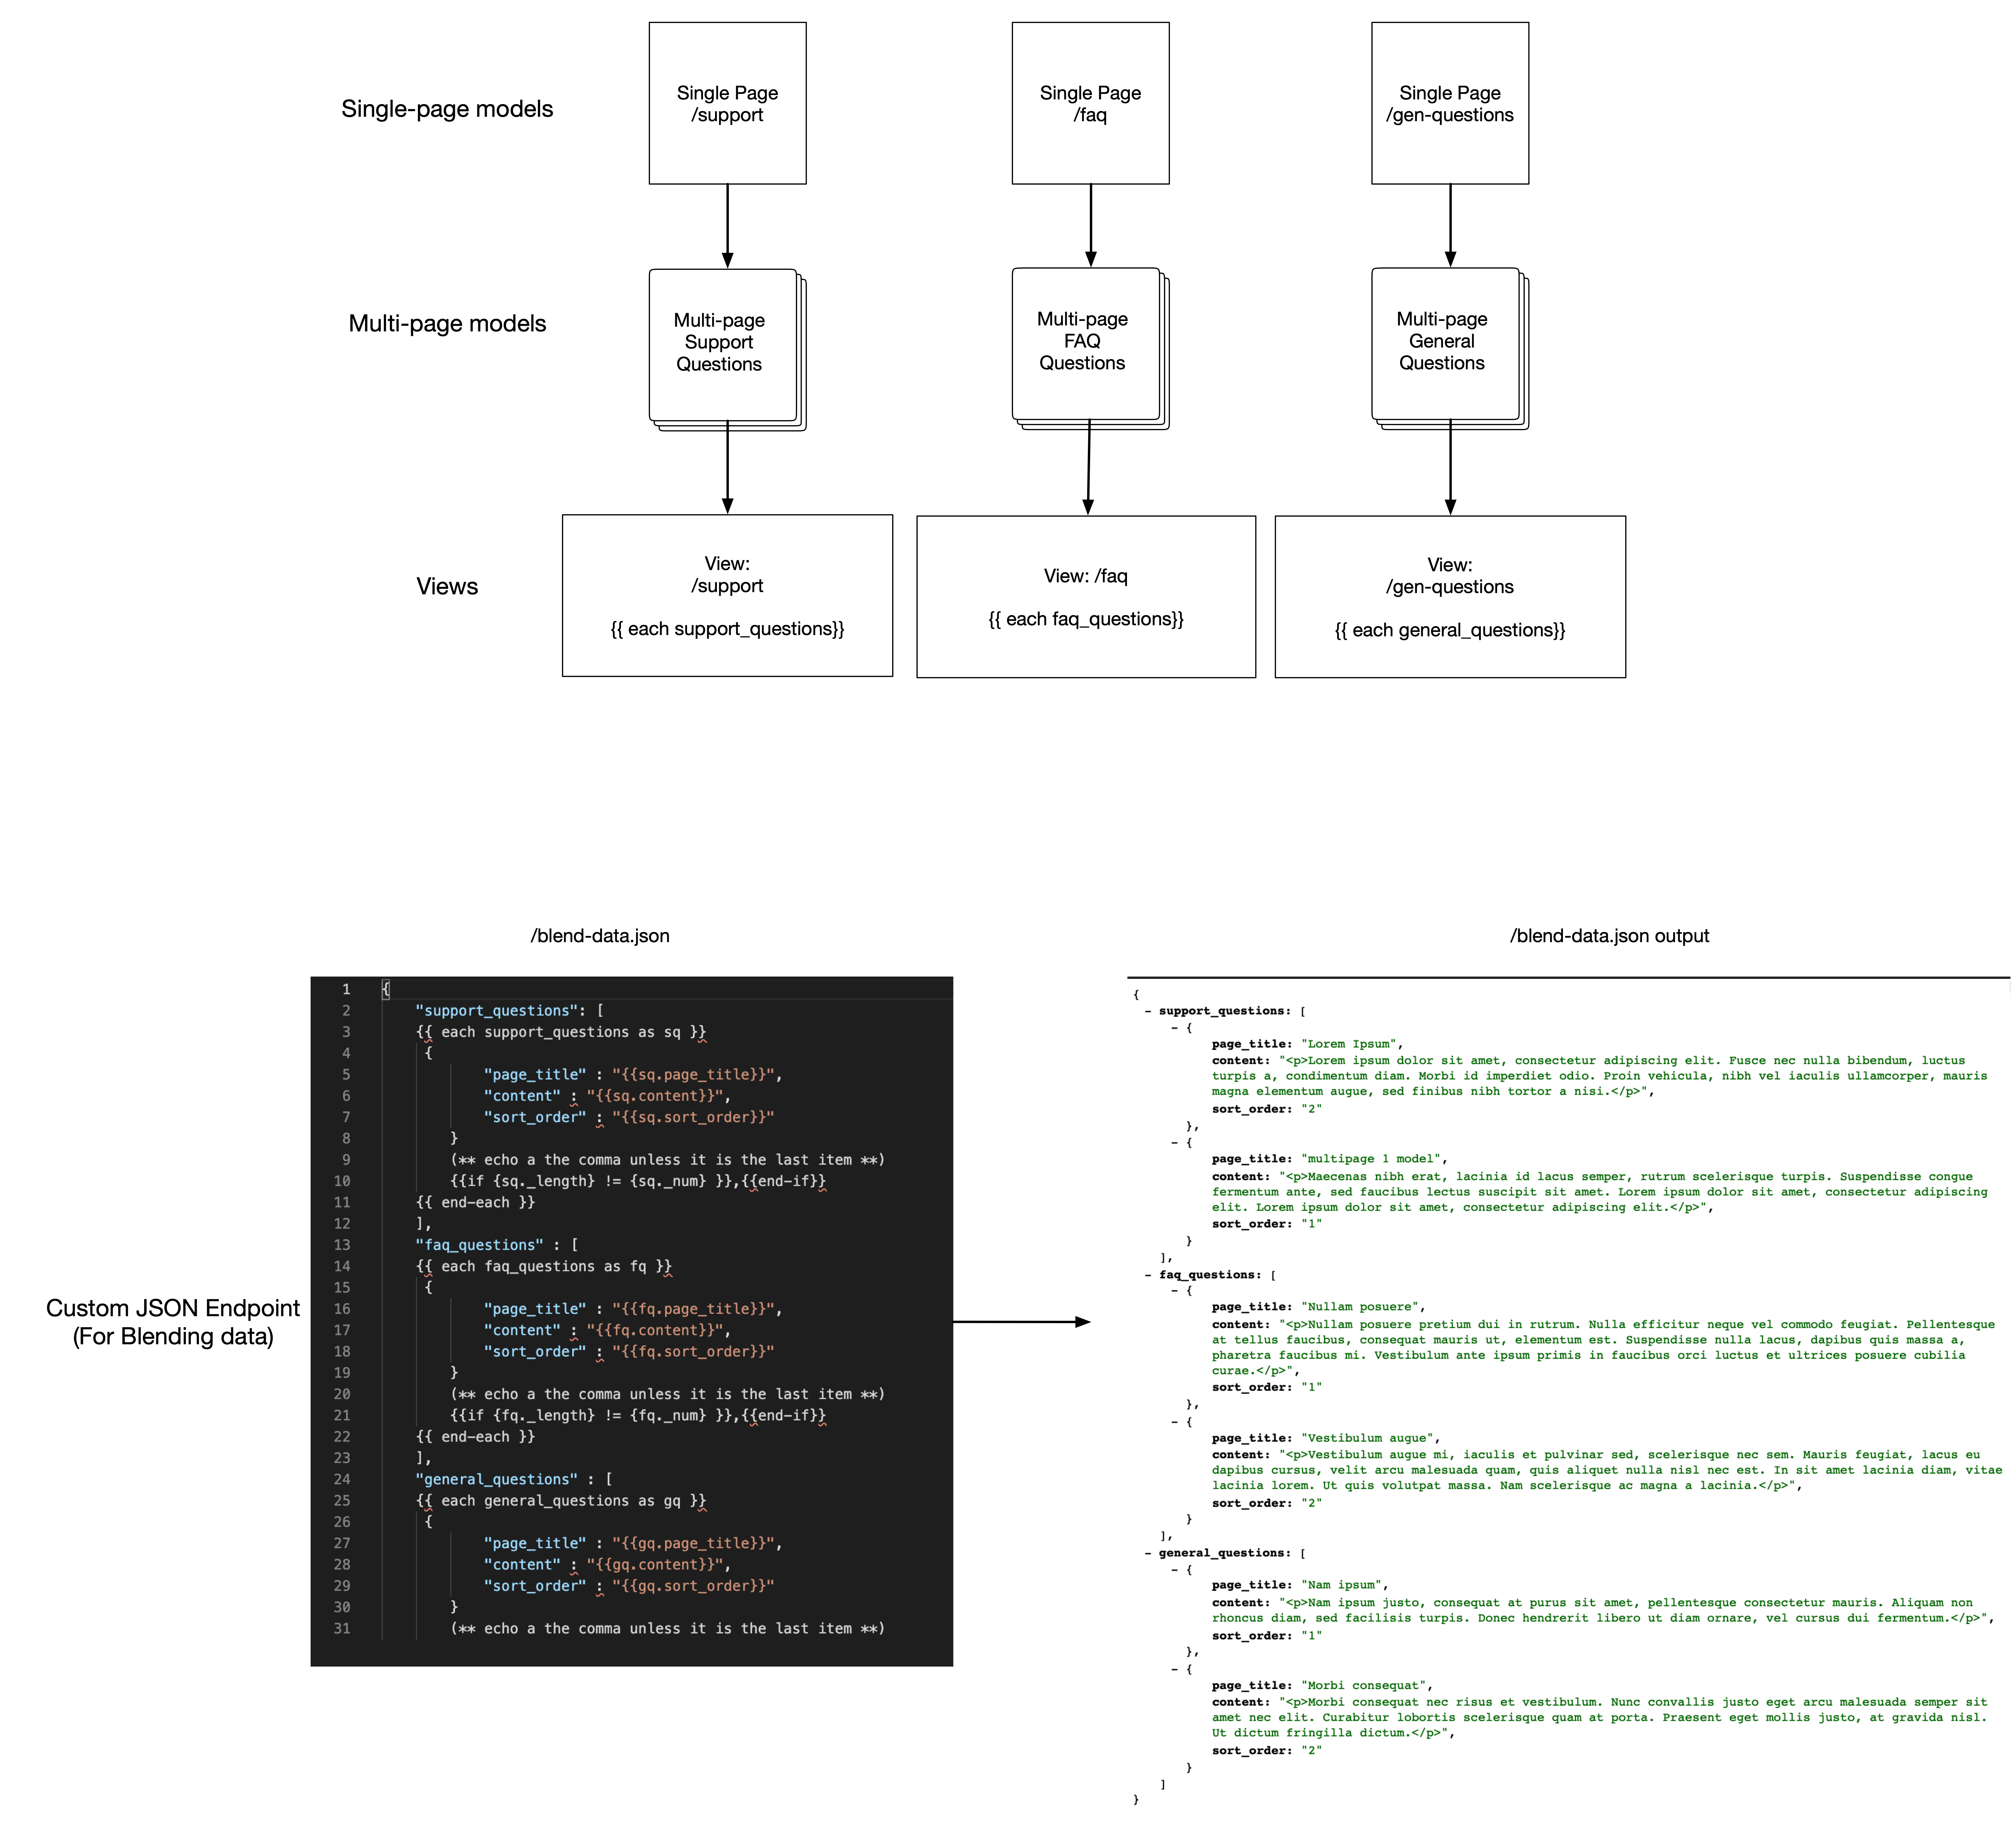 Shows how Schema & Views are related including custom endpoint example.